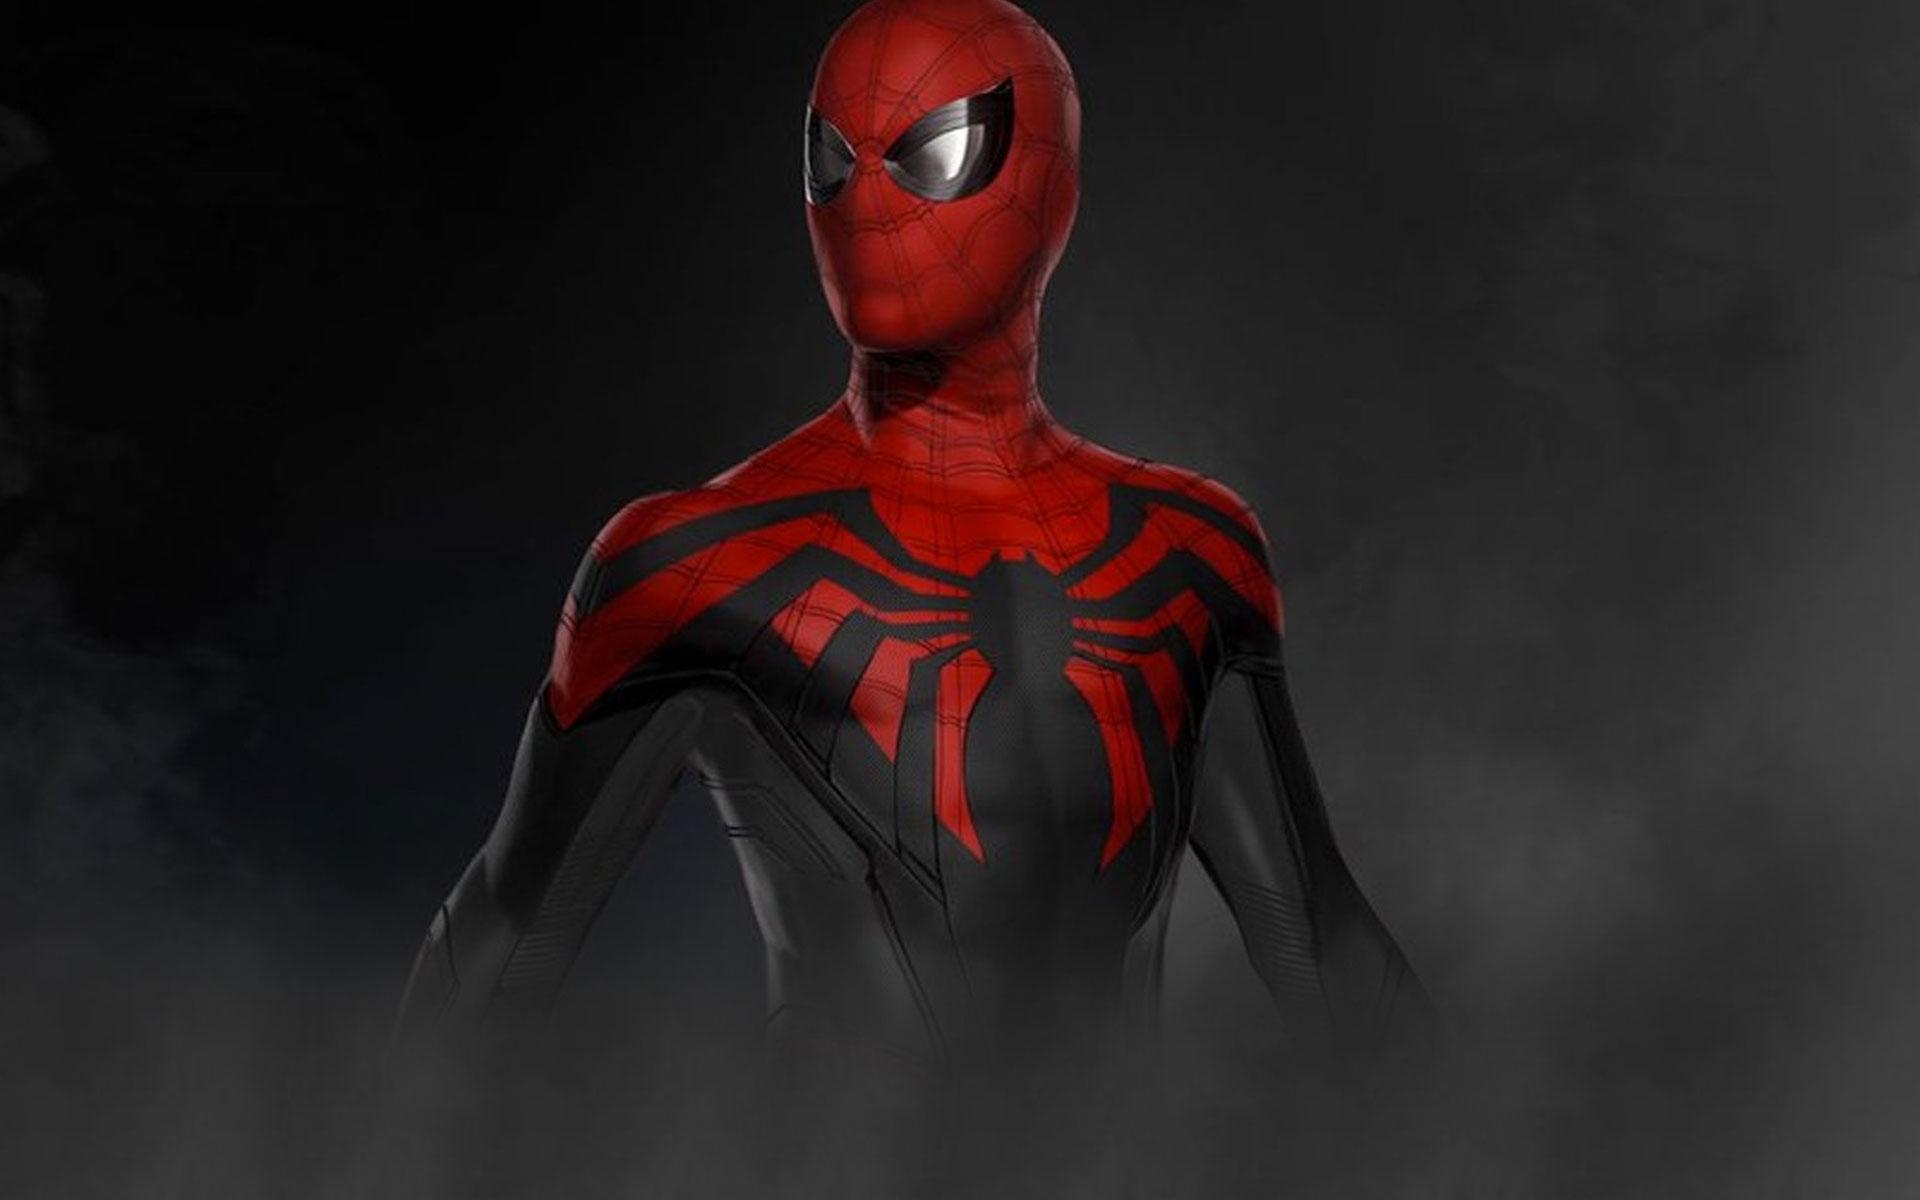 Spider Man Far From Home Movie (2019) Wallpaper HD, Cast, Release Date, Official & Posters